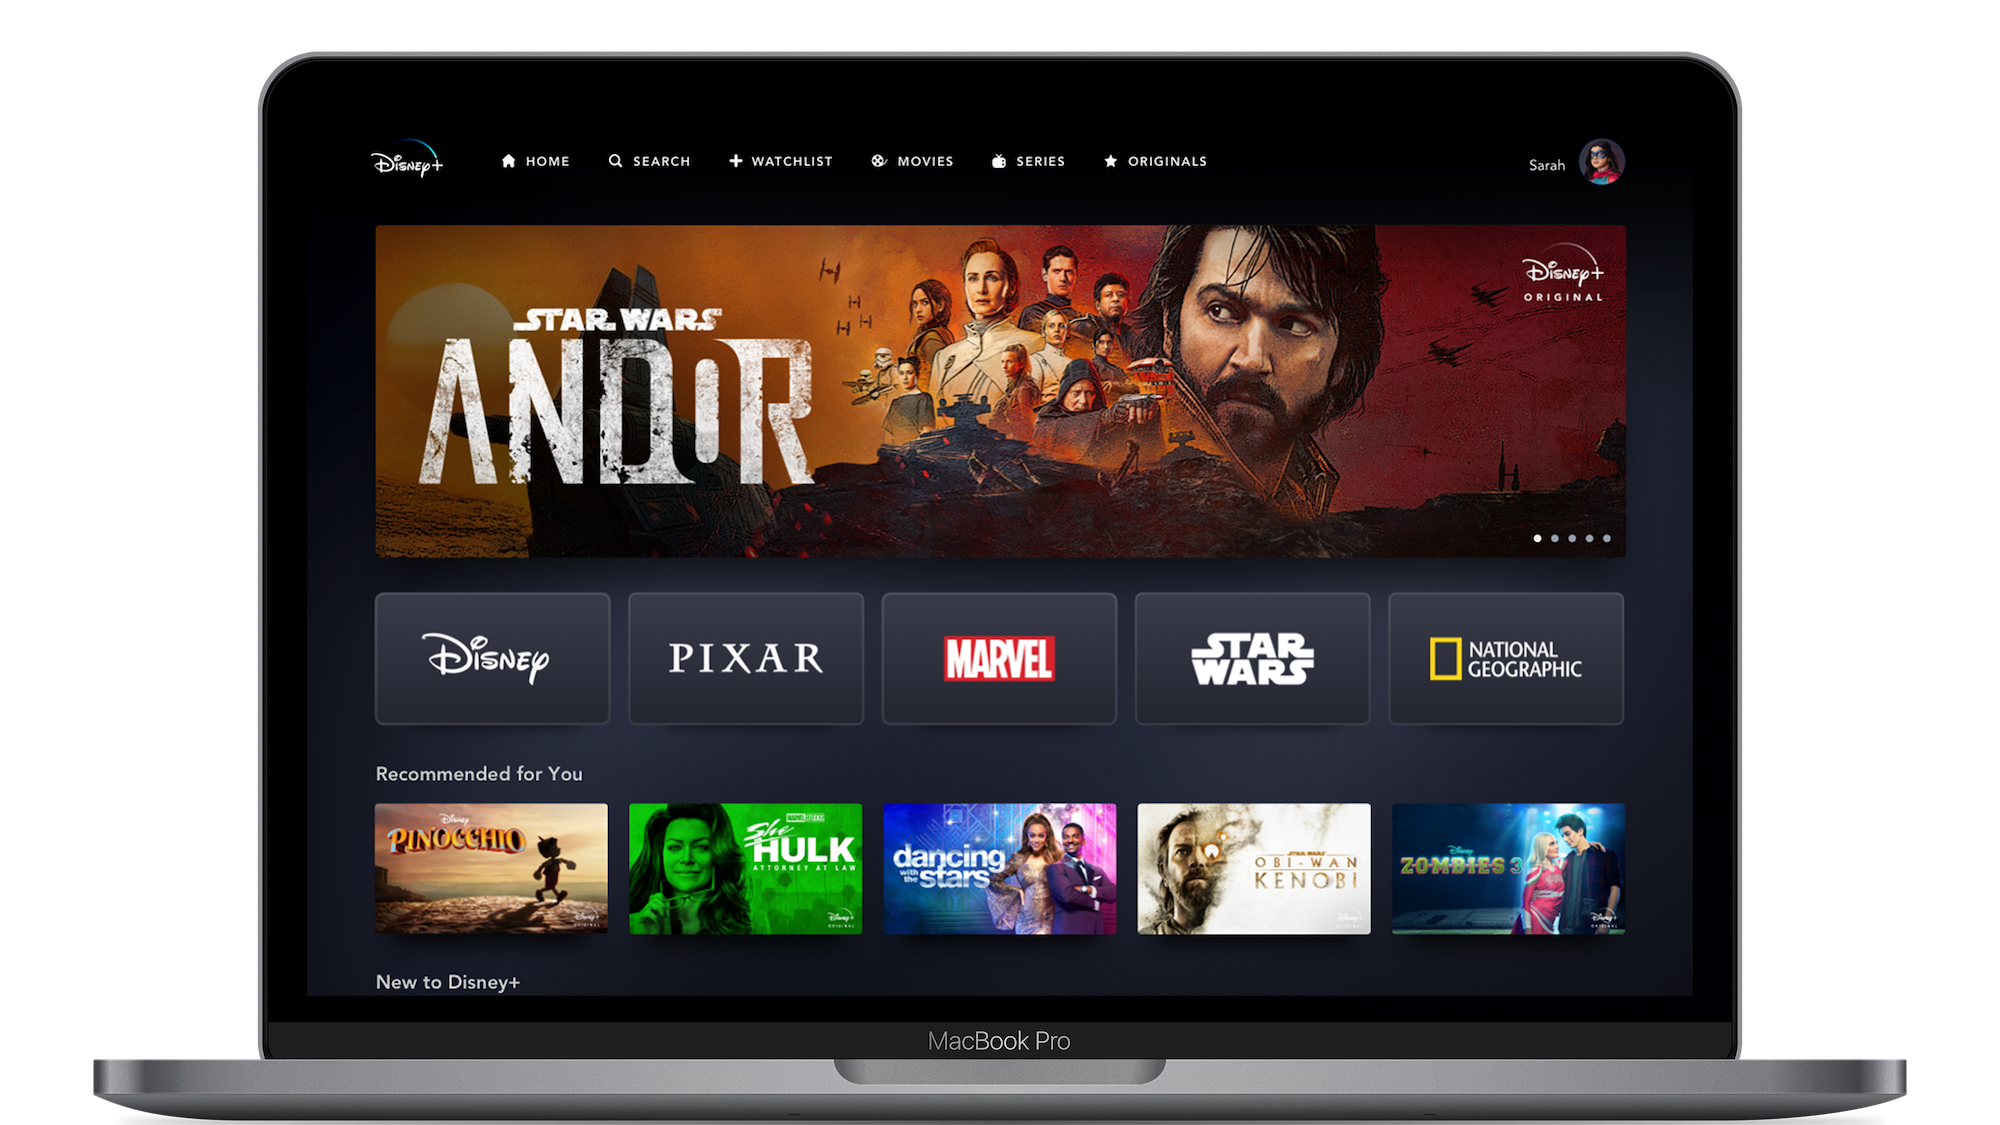 Disney+ App Home Page on Web Device